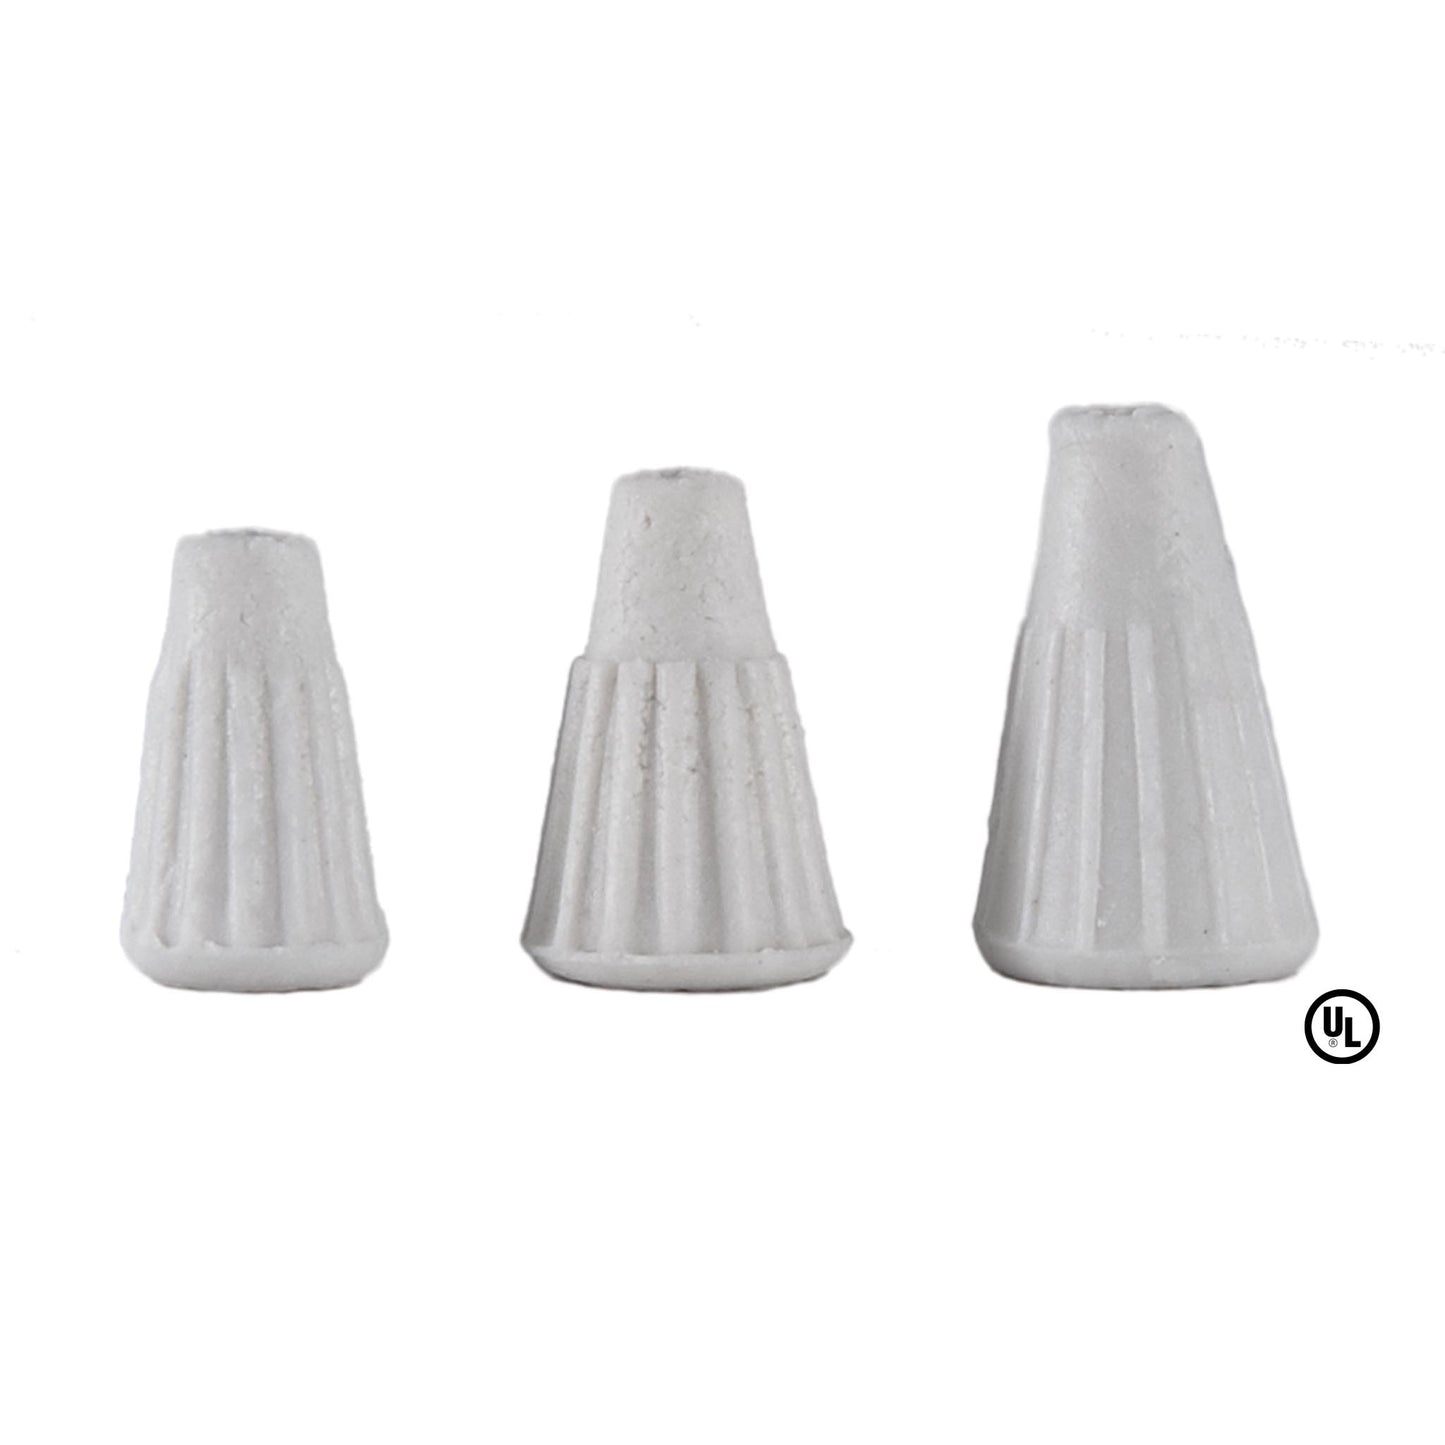 Porcelain High Heat Wire Connectors, small, medium, & large sizes available (48490)